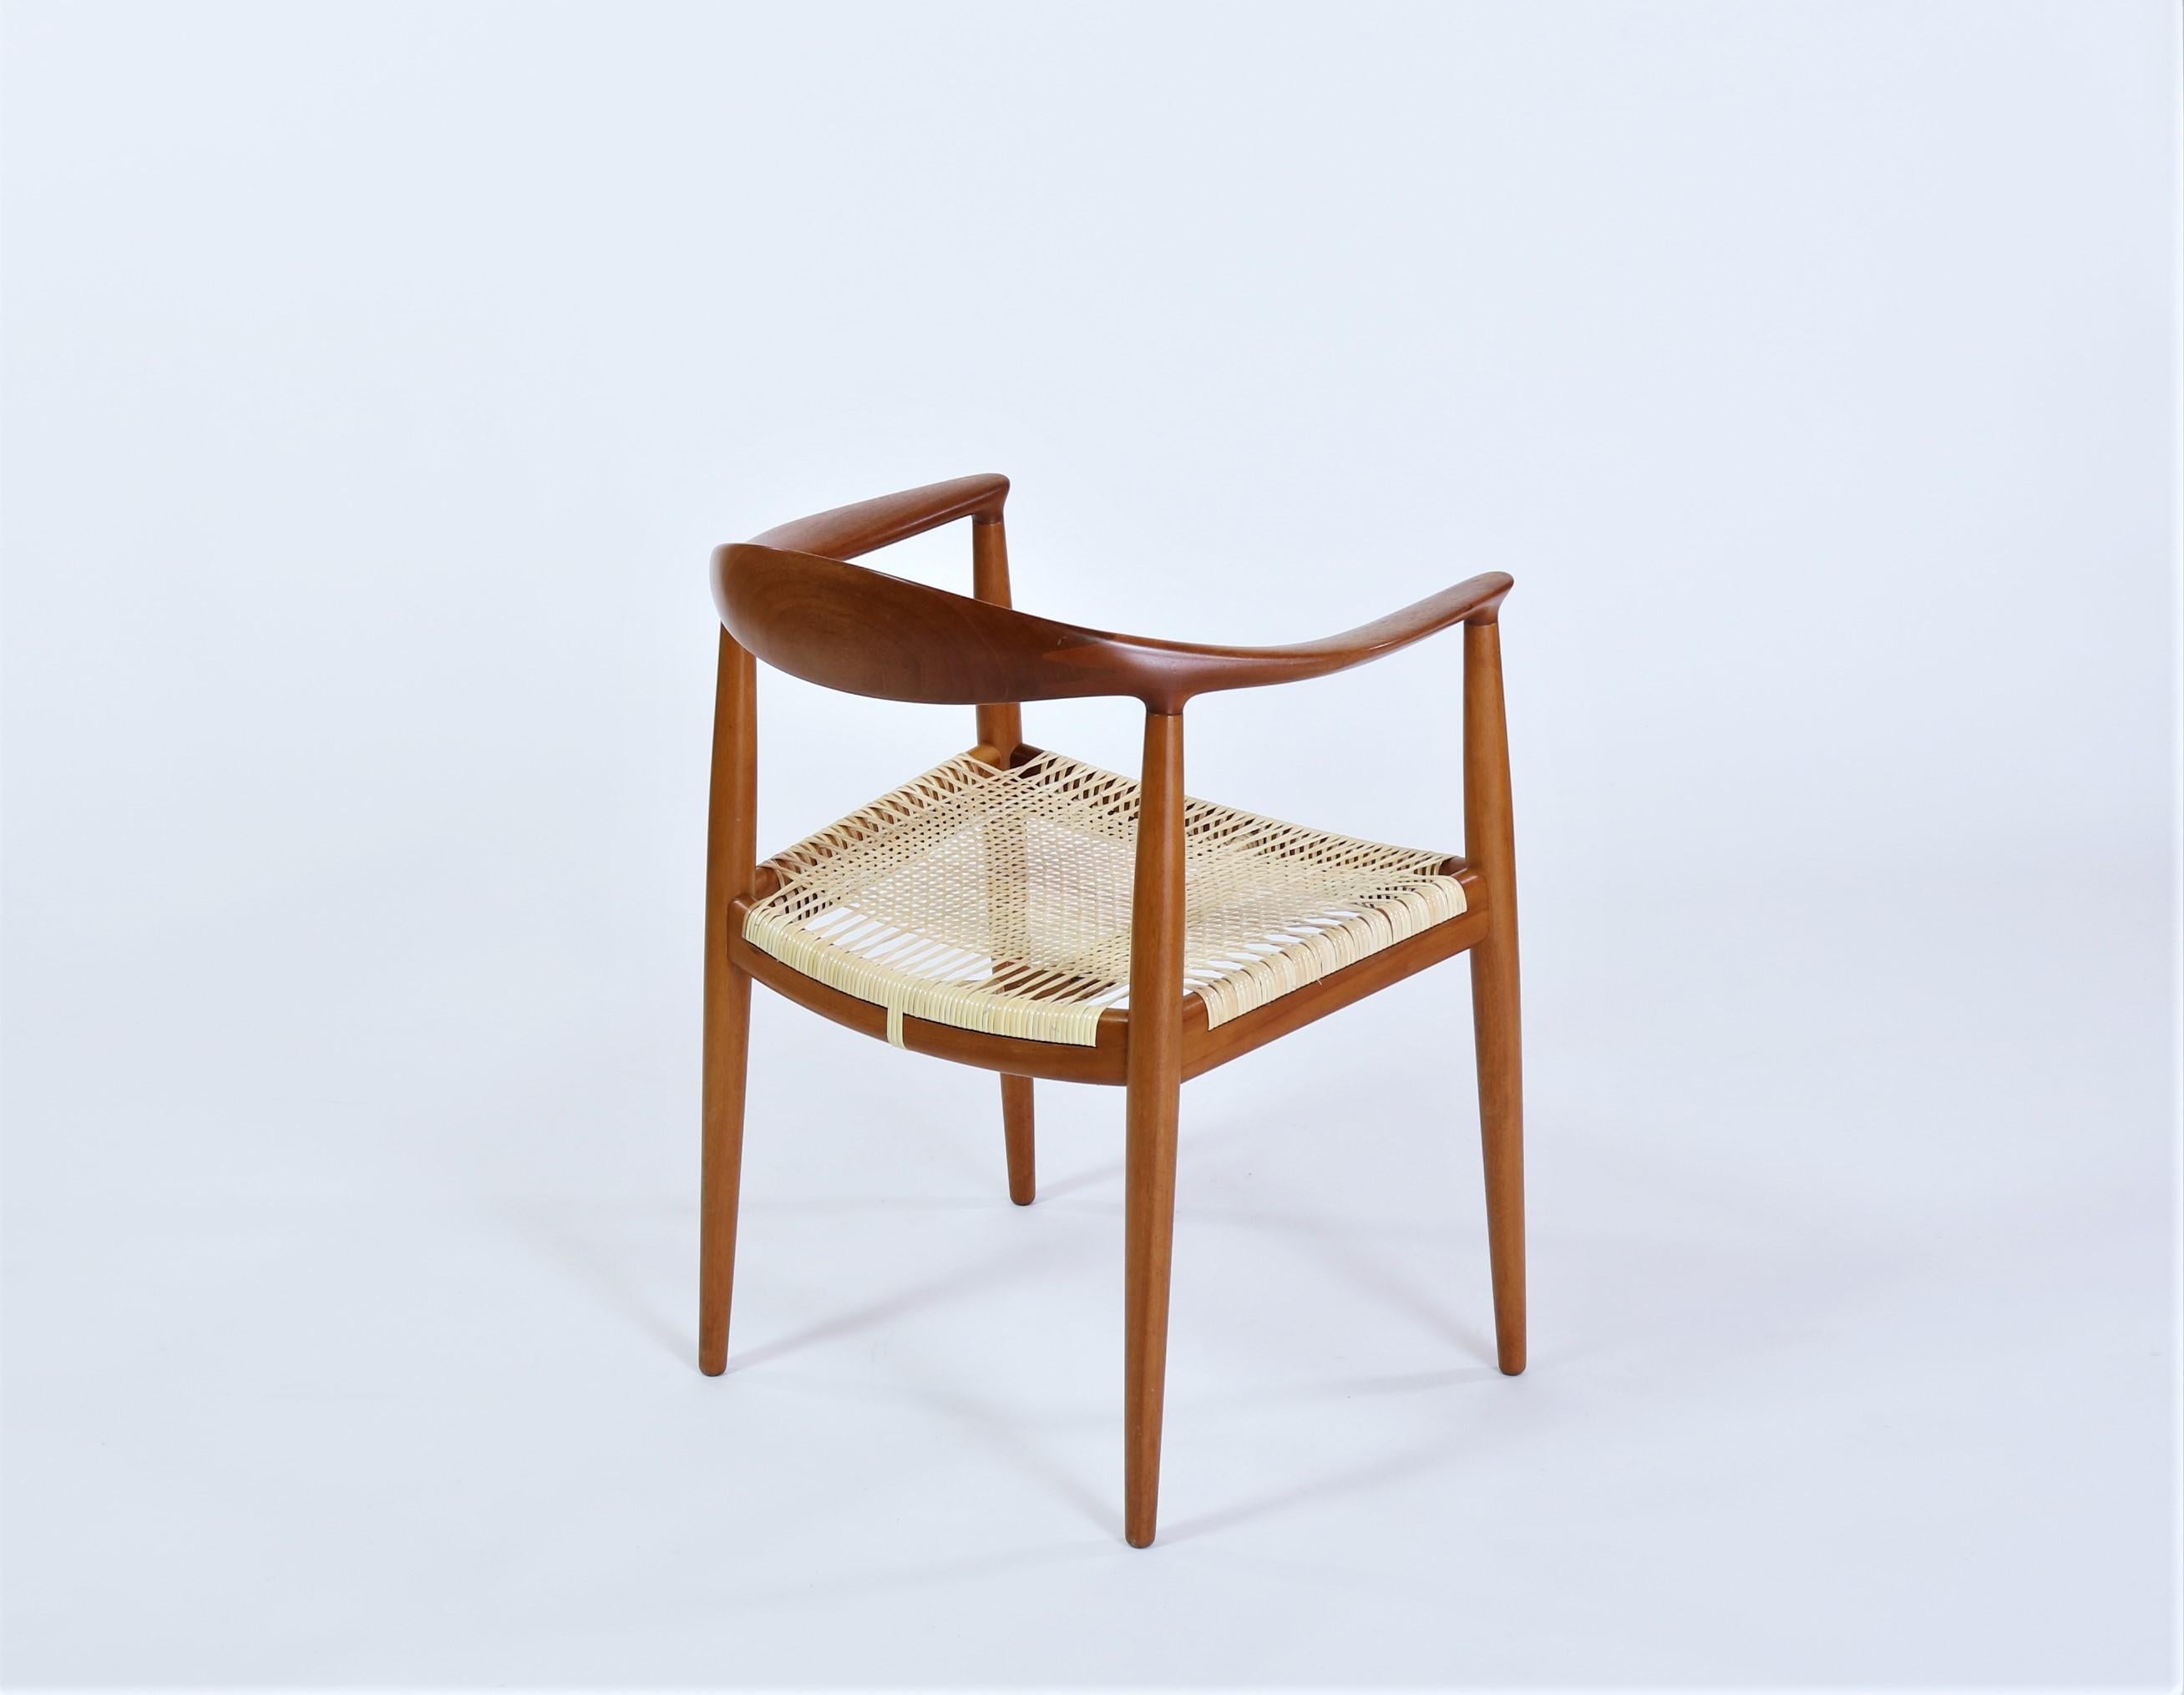 Designed by Hans J. Wegner in 1949 this is one of the most iconic pieces of Danish modern furniture design. Rare and early model 